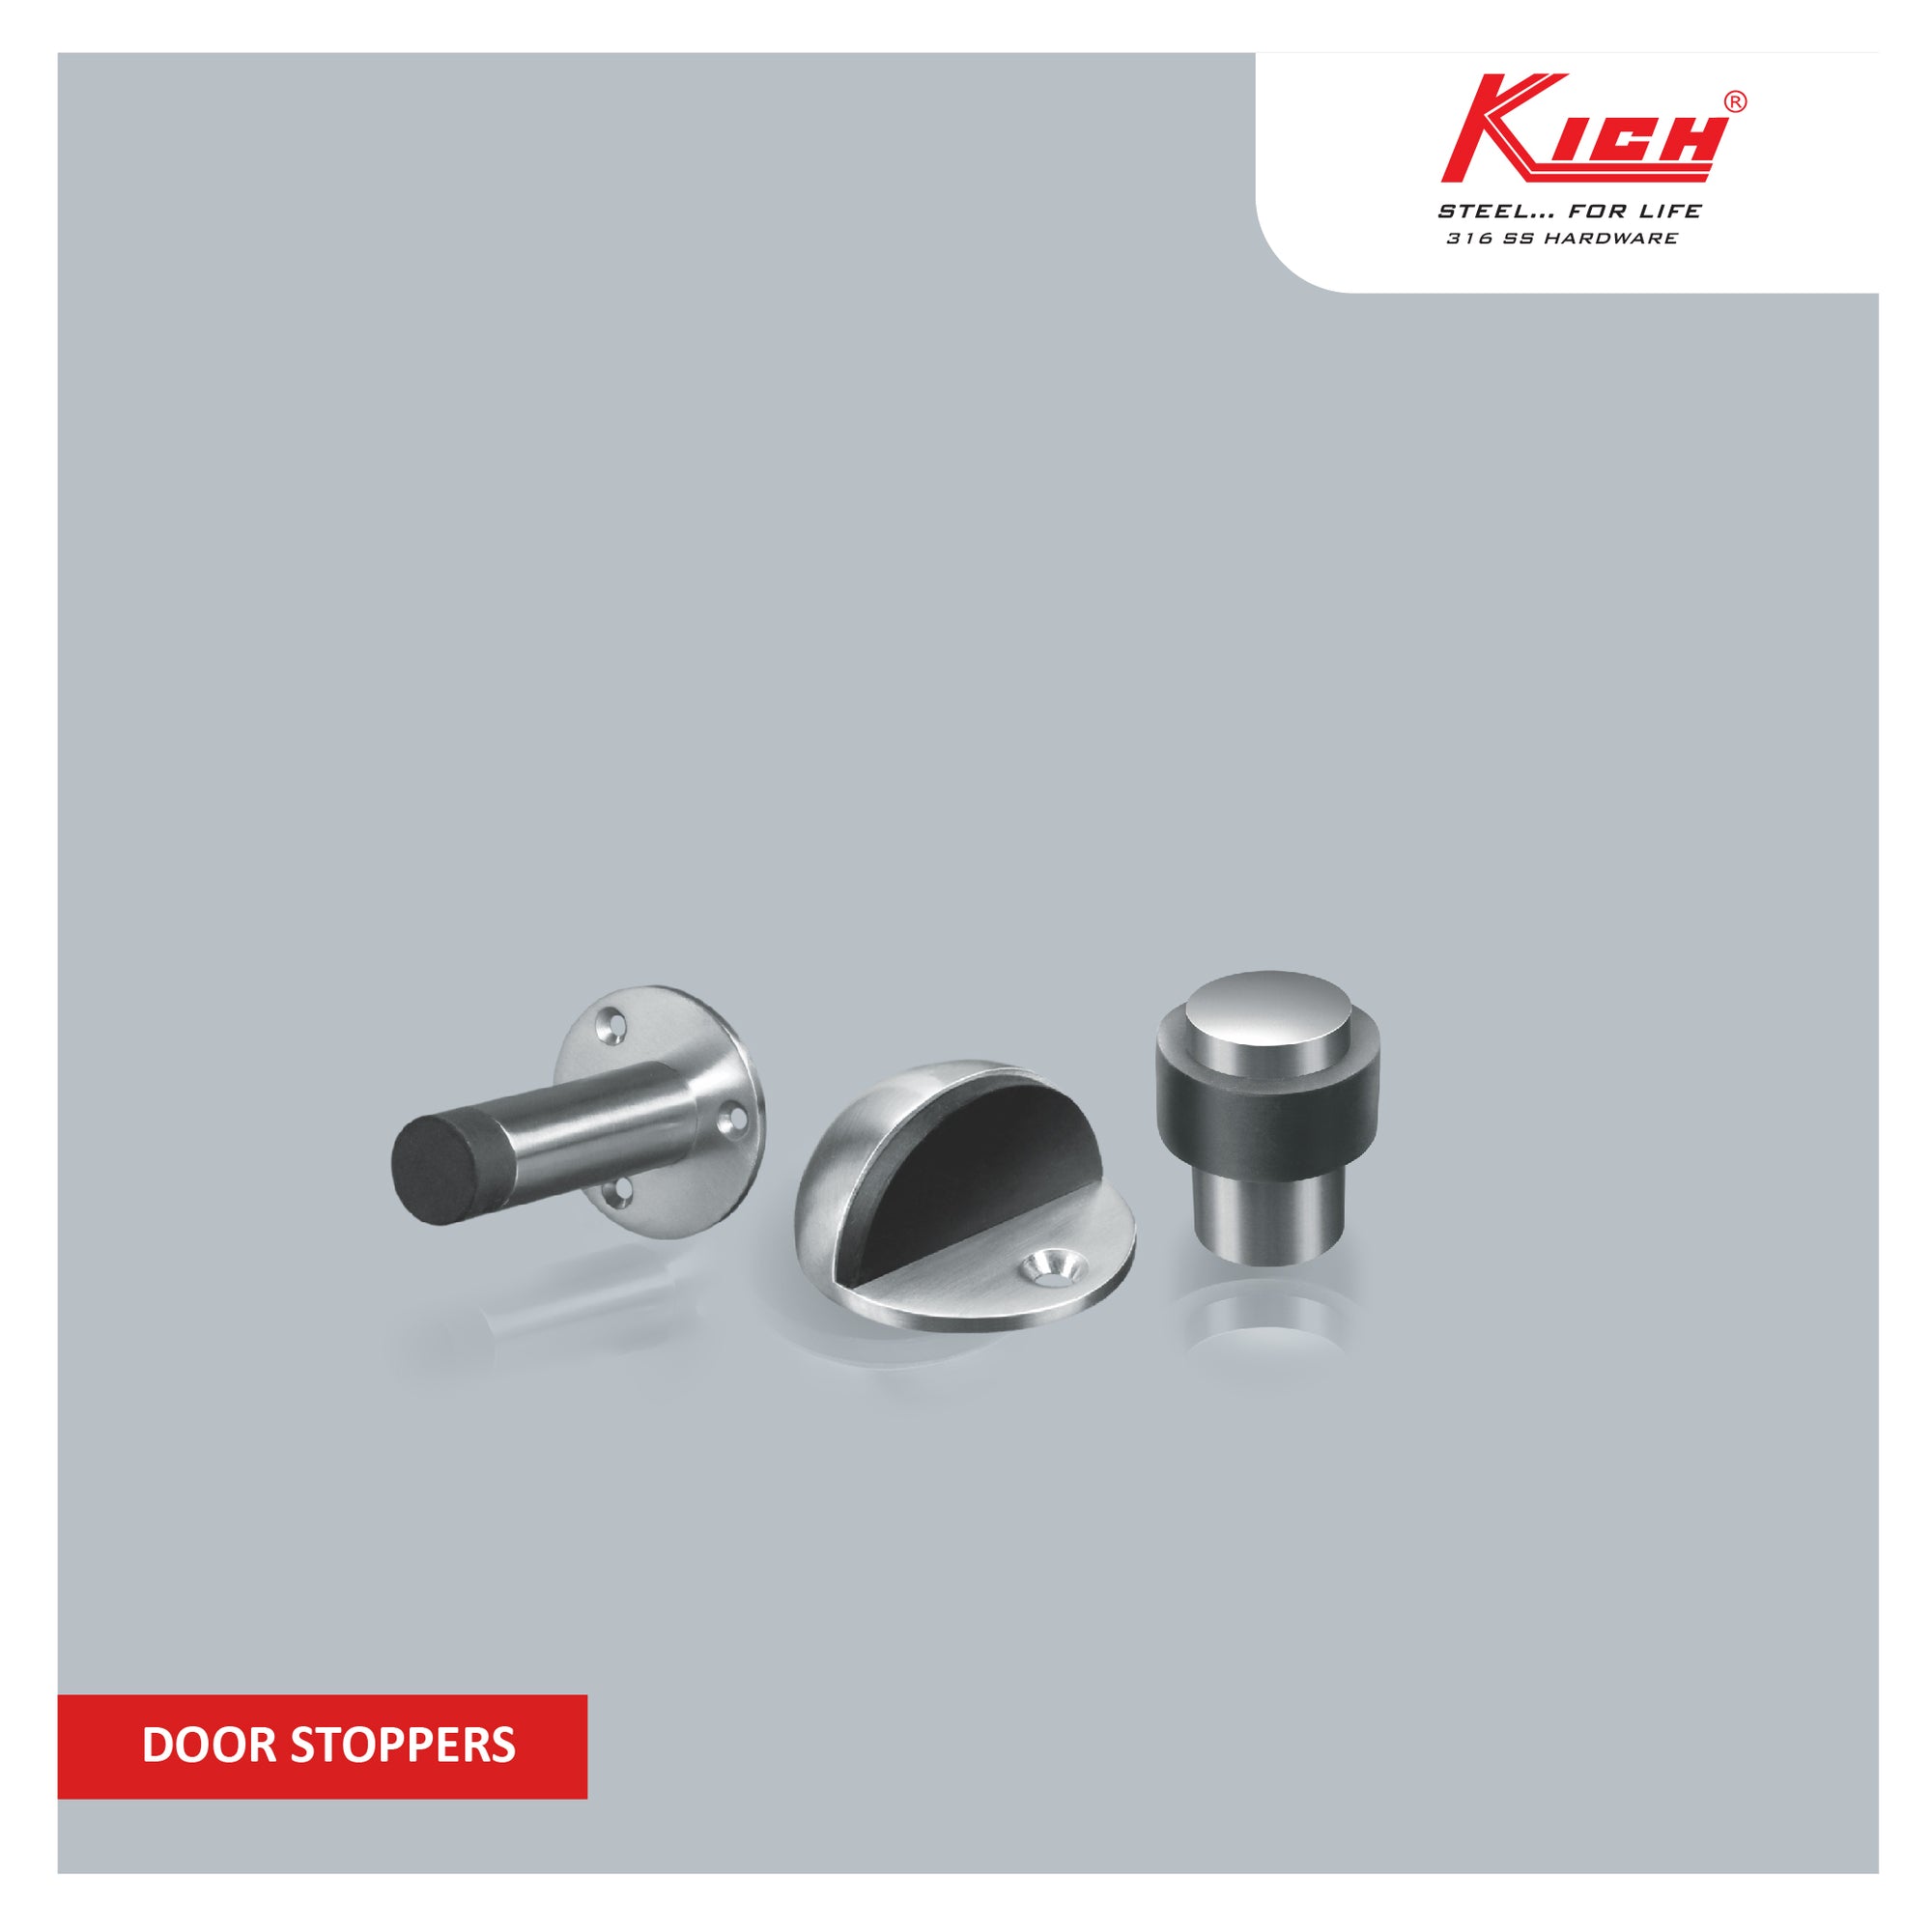 Kich Door Stoppers | Category